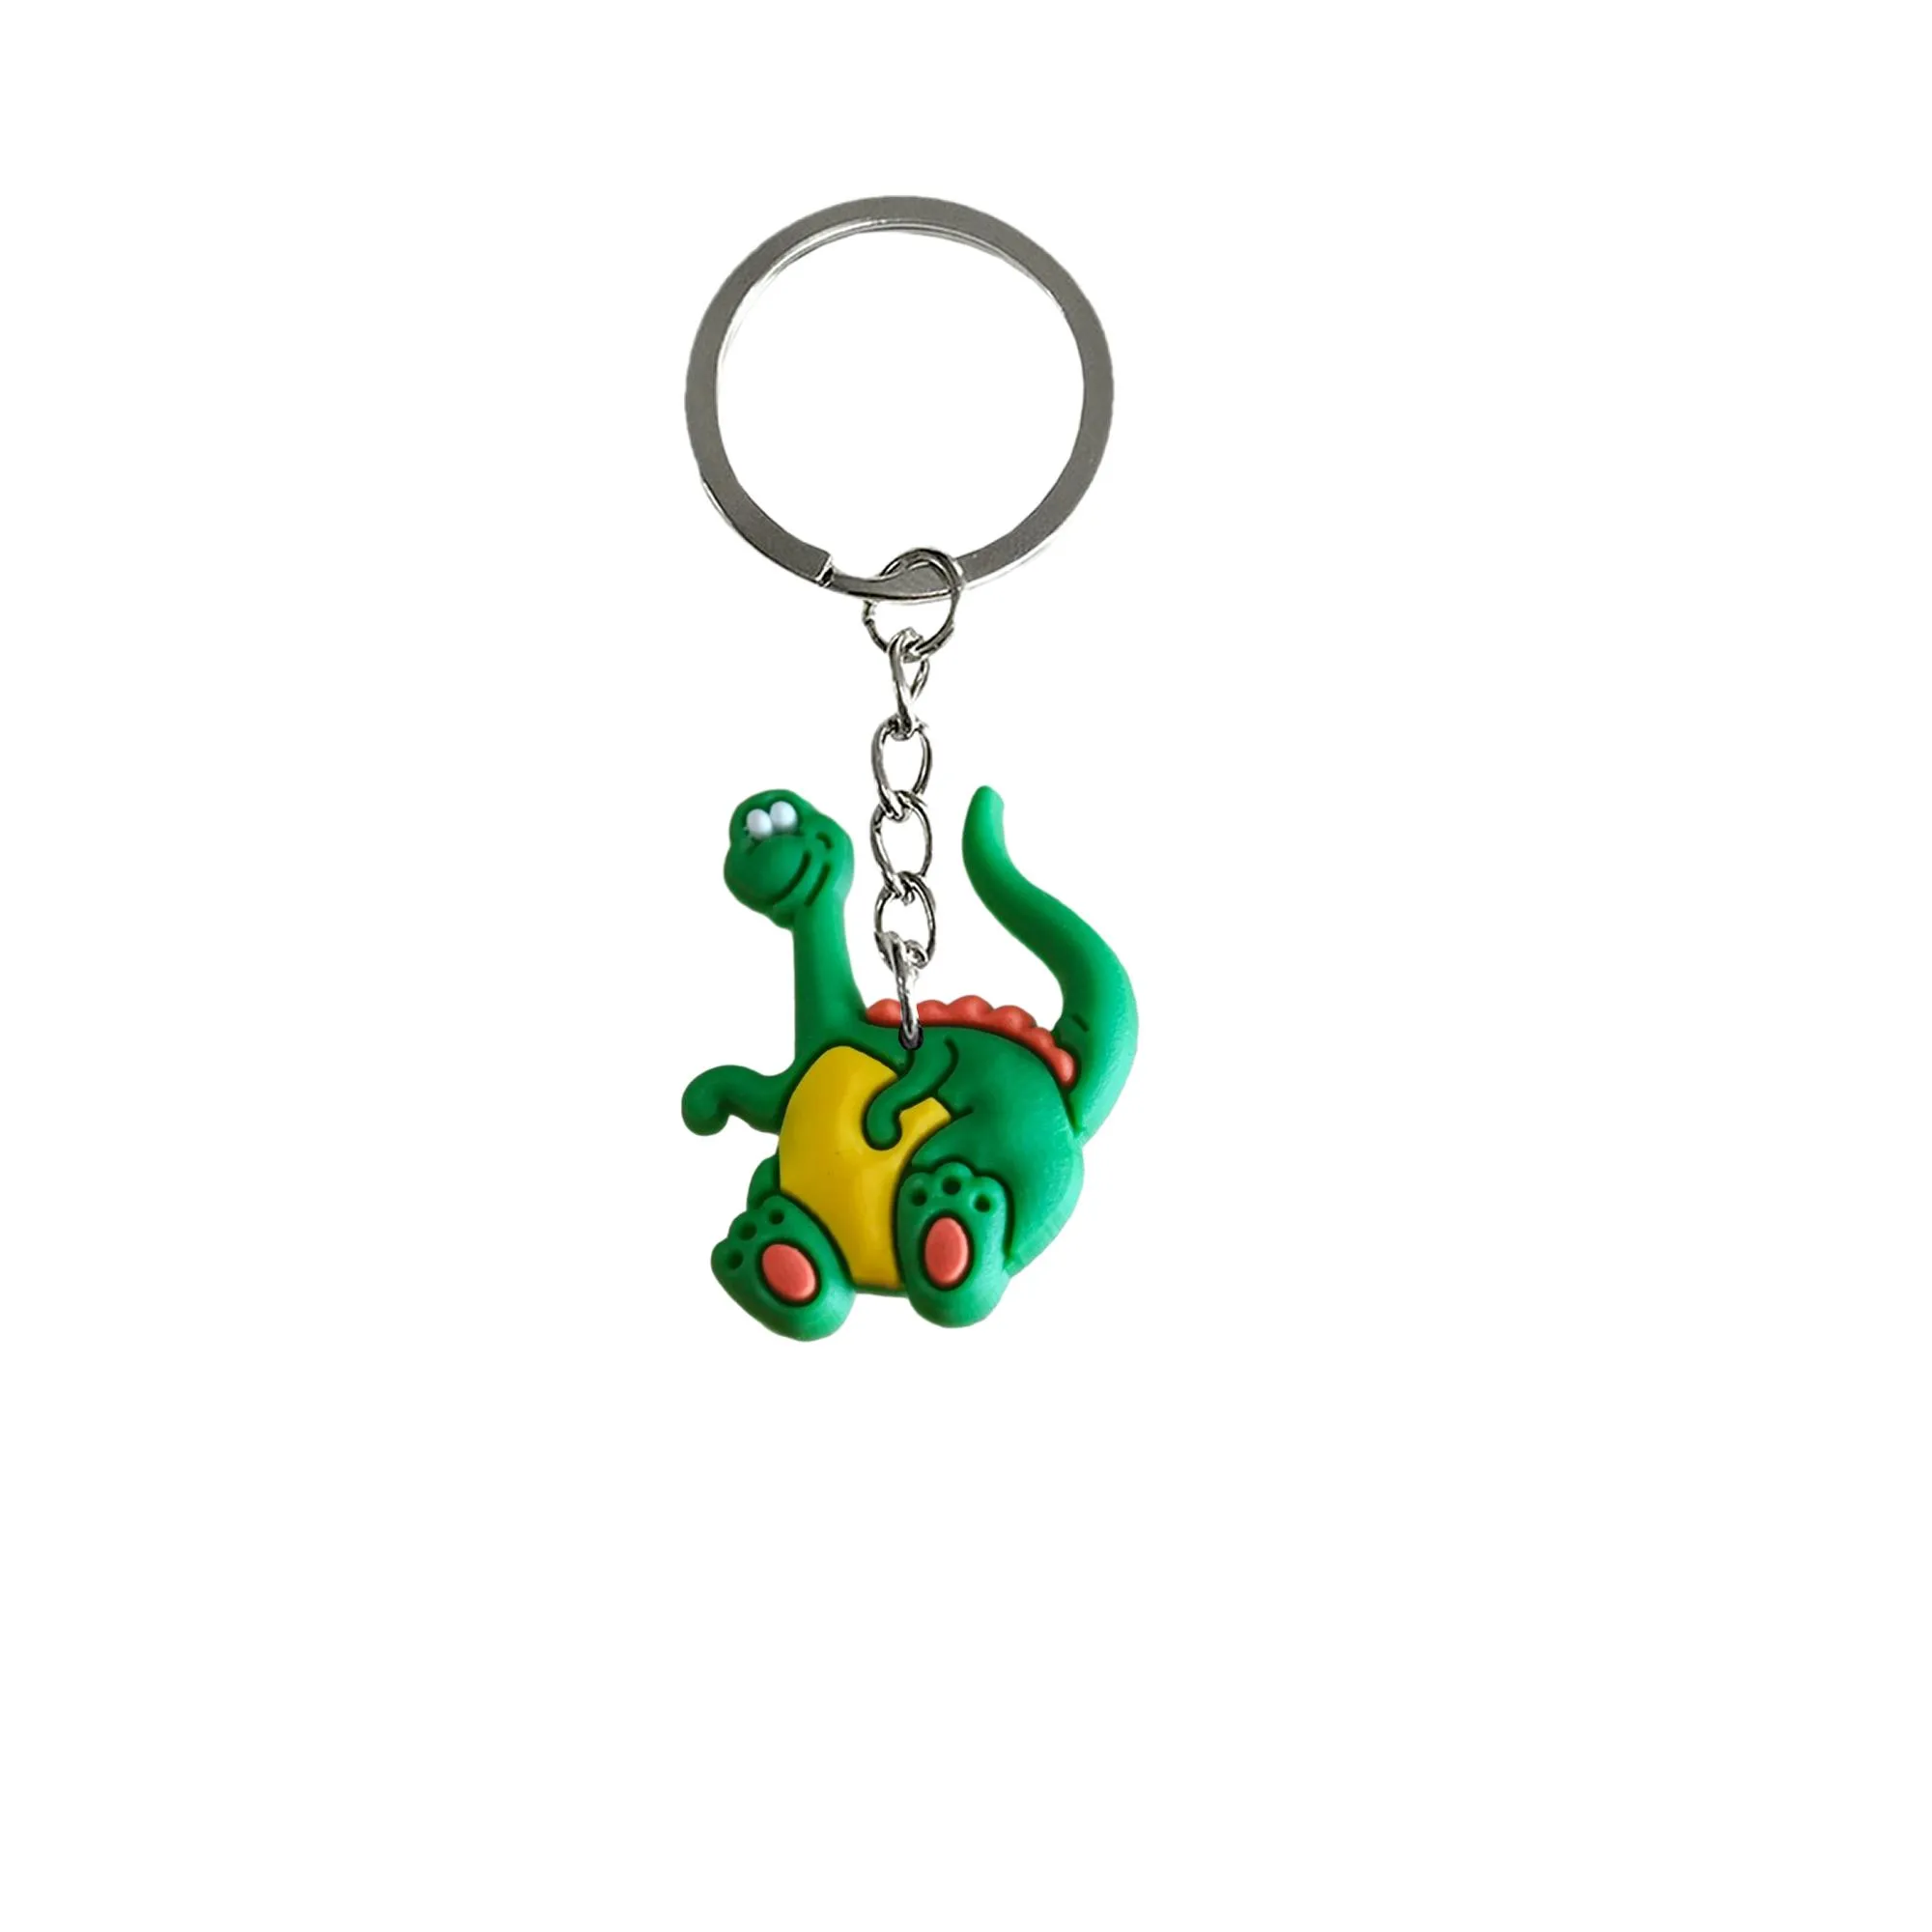 dinosaur keychain keyring for men keychains kids party favors suitable schoolbag car bag goodie stuffers supplies pendants accessories birthday